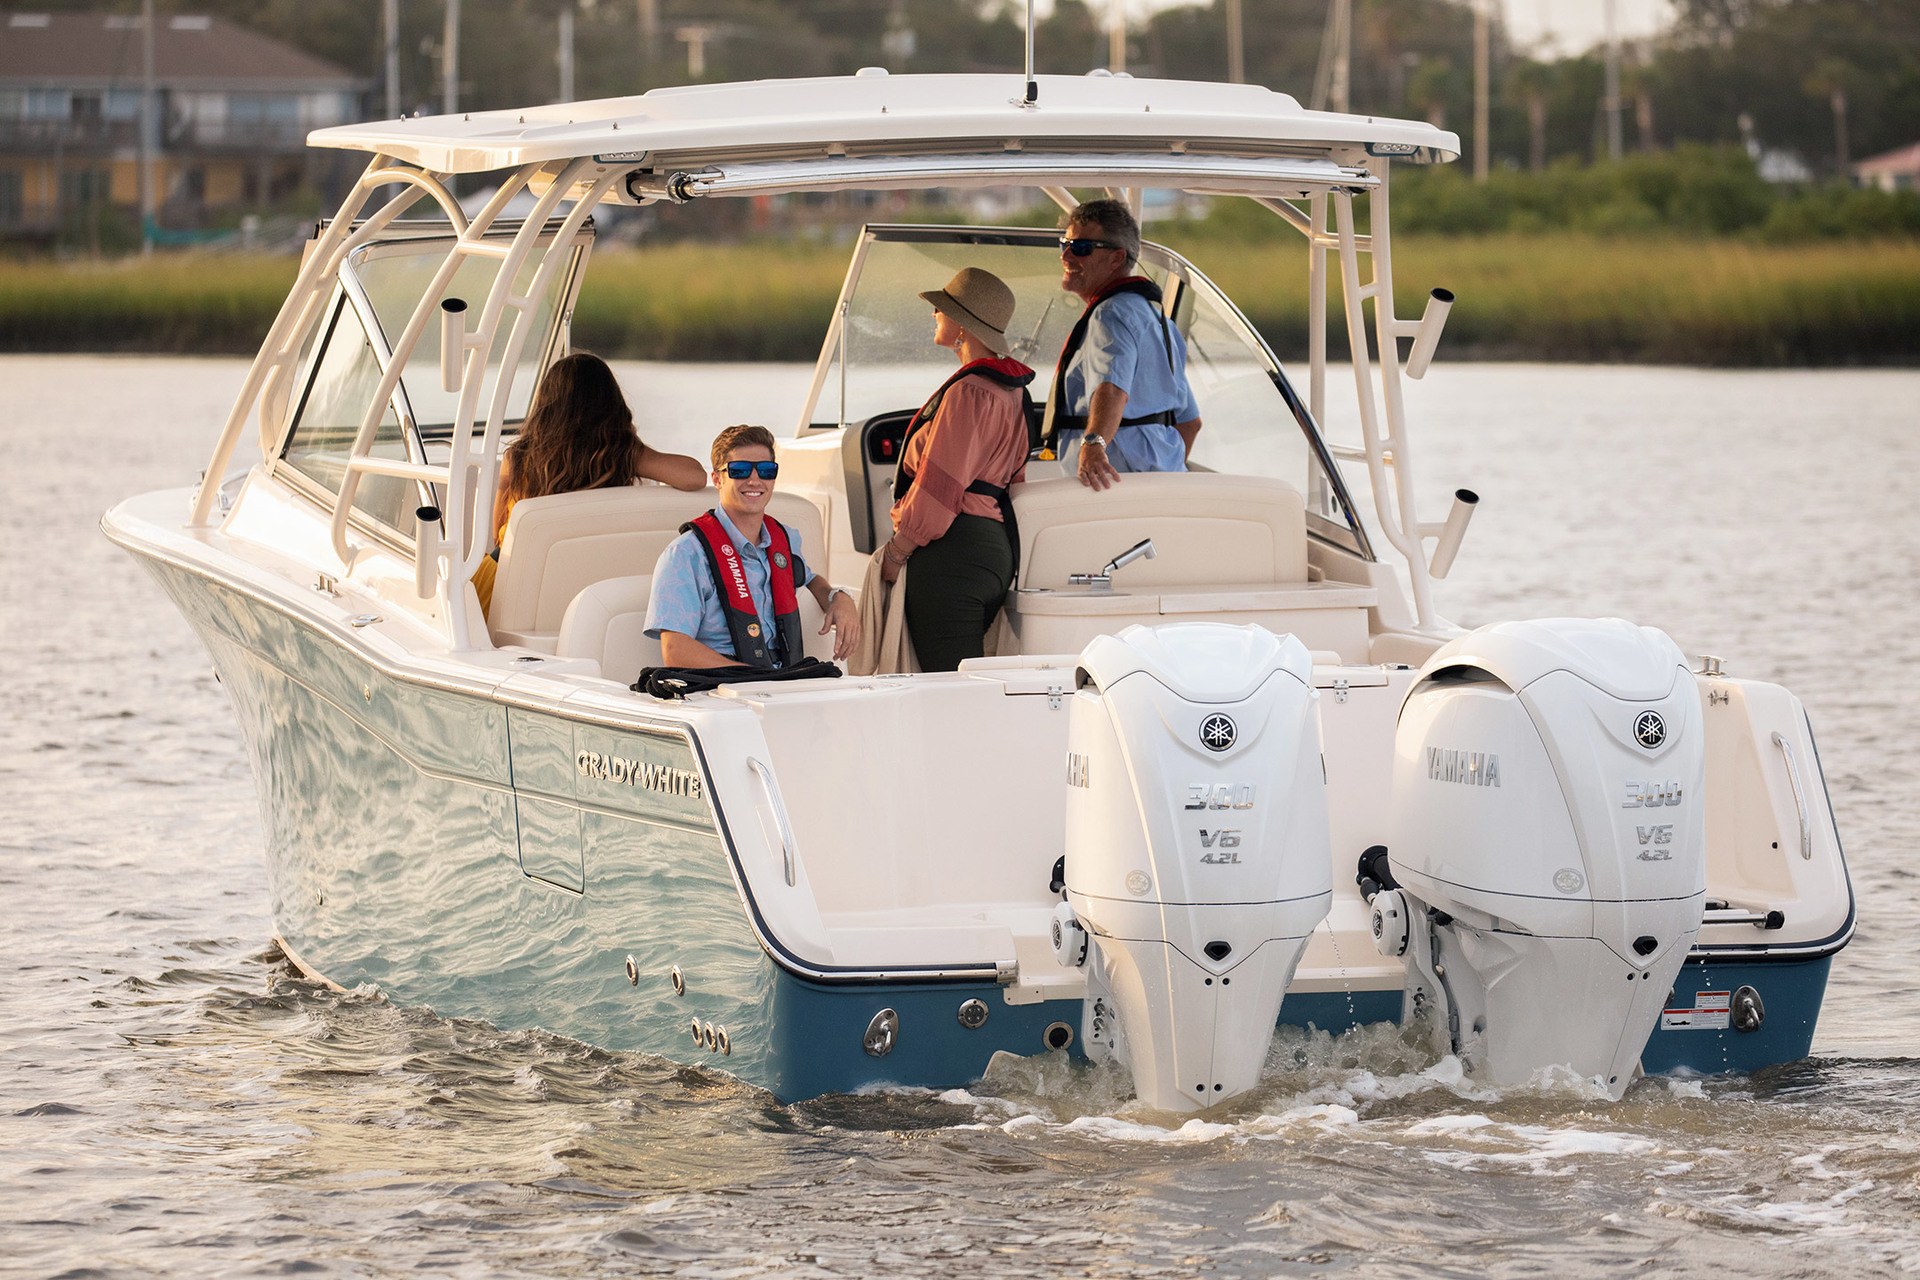 Image Introducing New Yamaha V6 Offshore Outboards A family on a Grady White powered by Yamaha 300hp V6 outboards